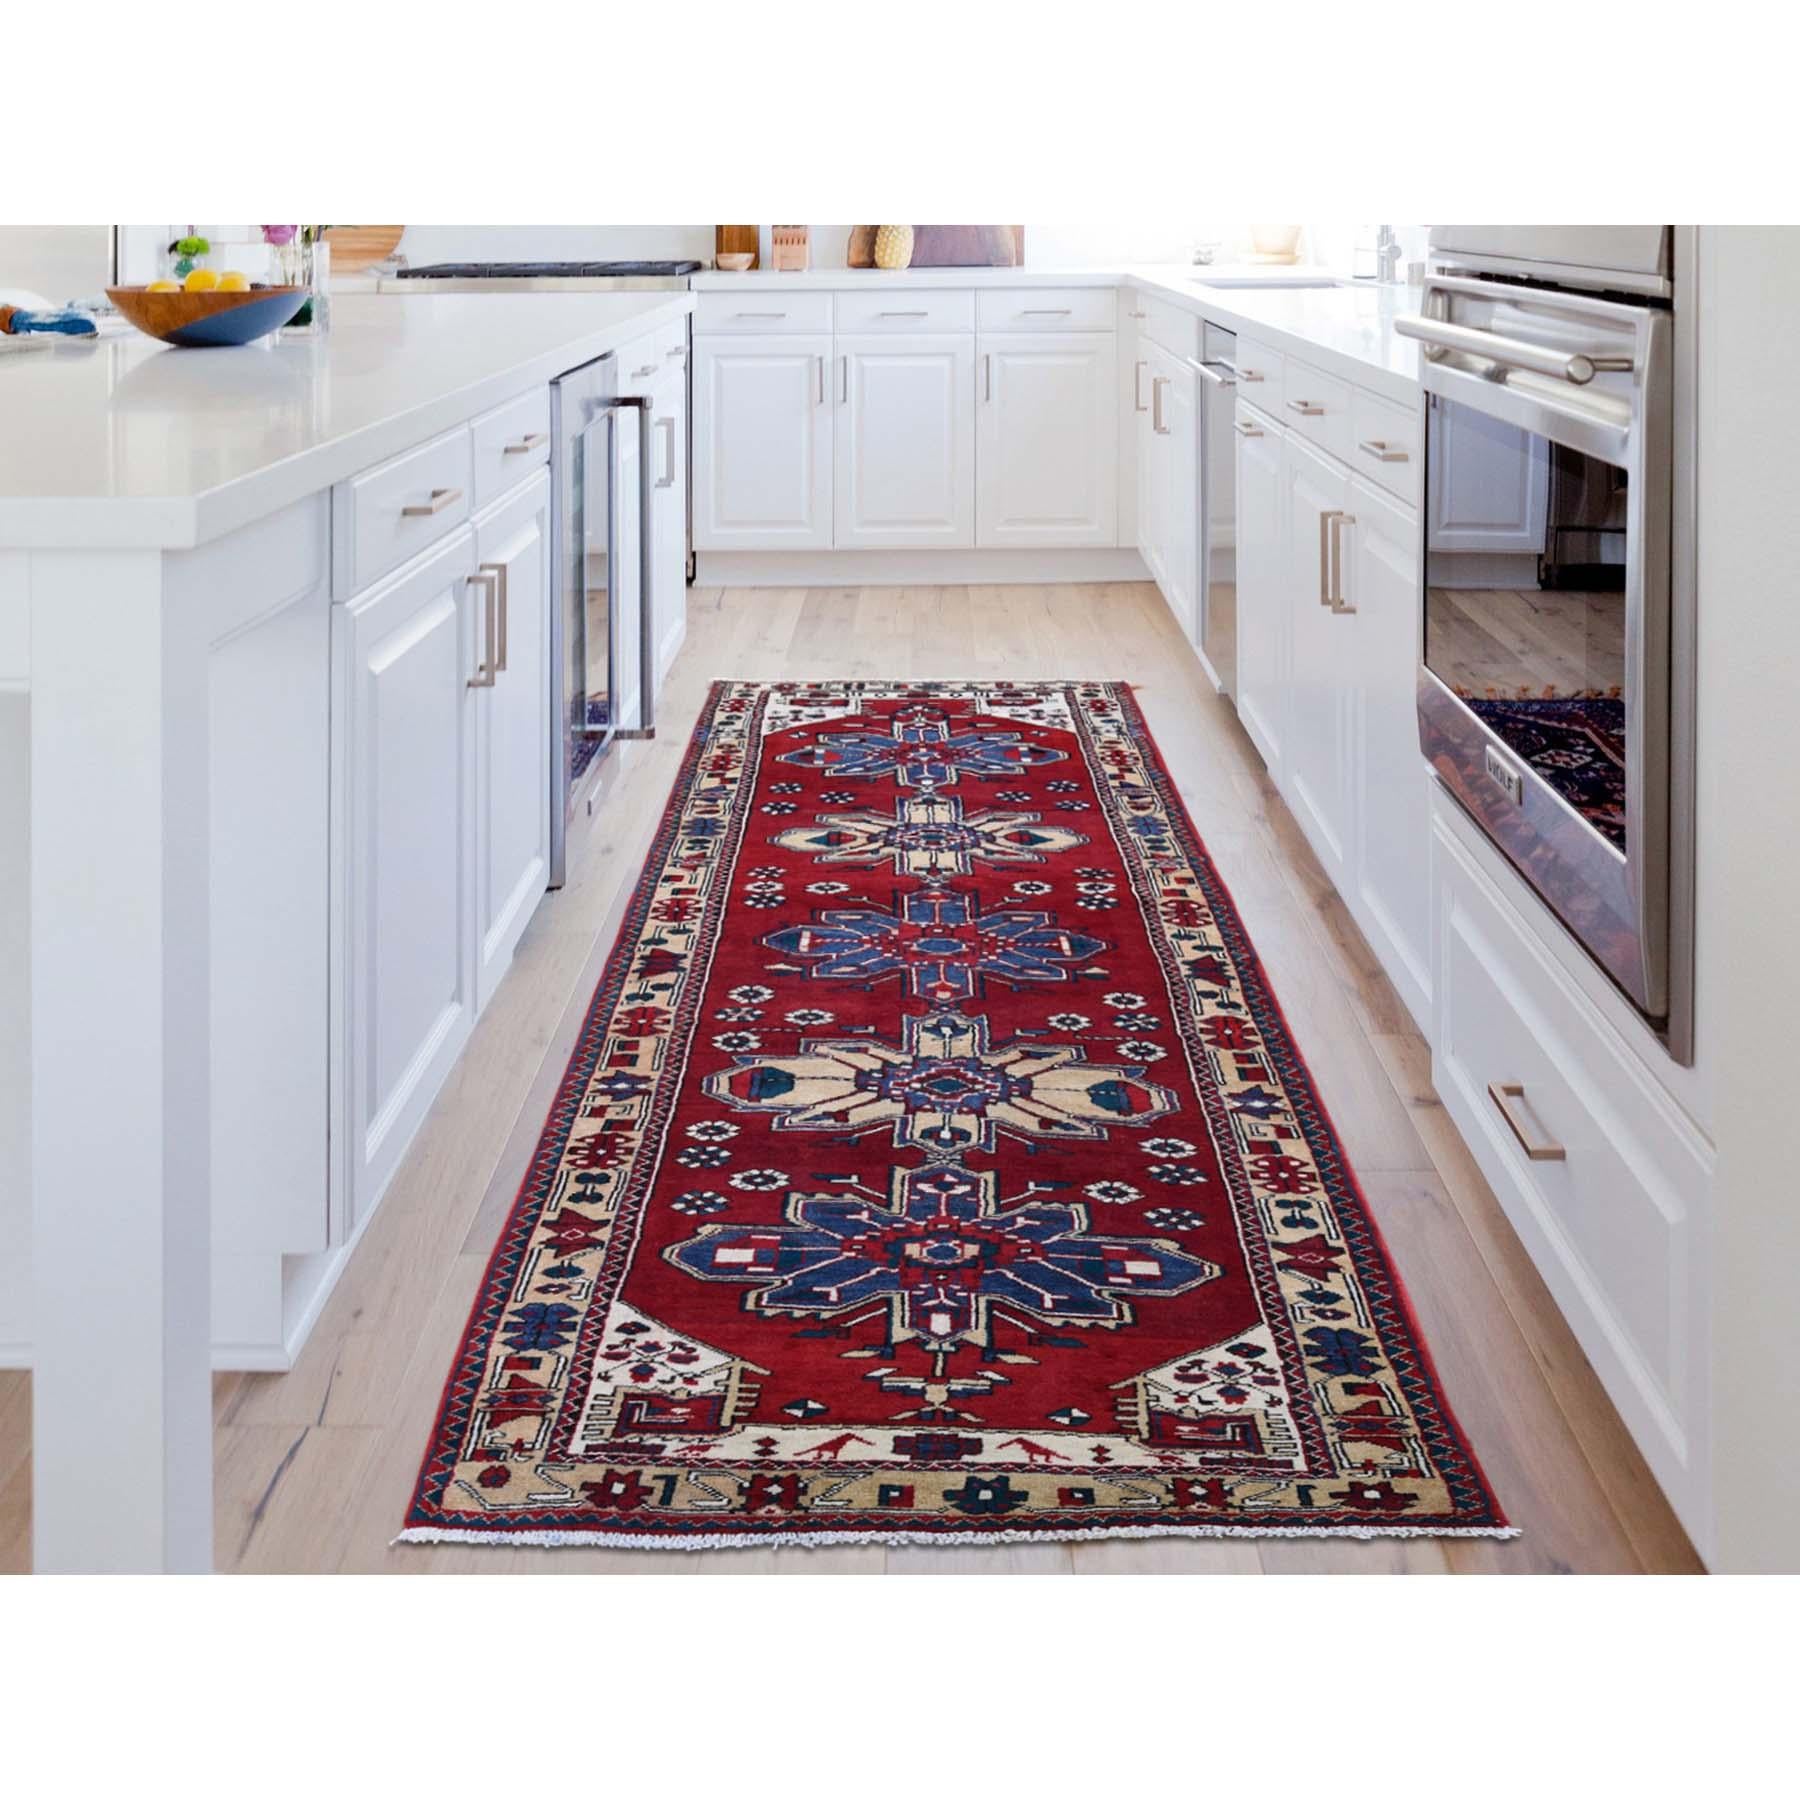 This is a truly genuine one-of-a-kind semi antique vintage Heriz hand knotted oriental rug. It has been knotted for months and months in the centuries-old Persian weaving craftsmanship techniques by expert artisans.

Primary materials: Wool
Latex: